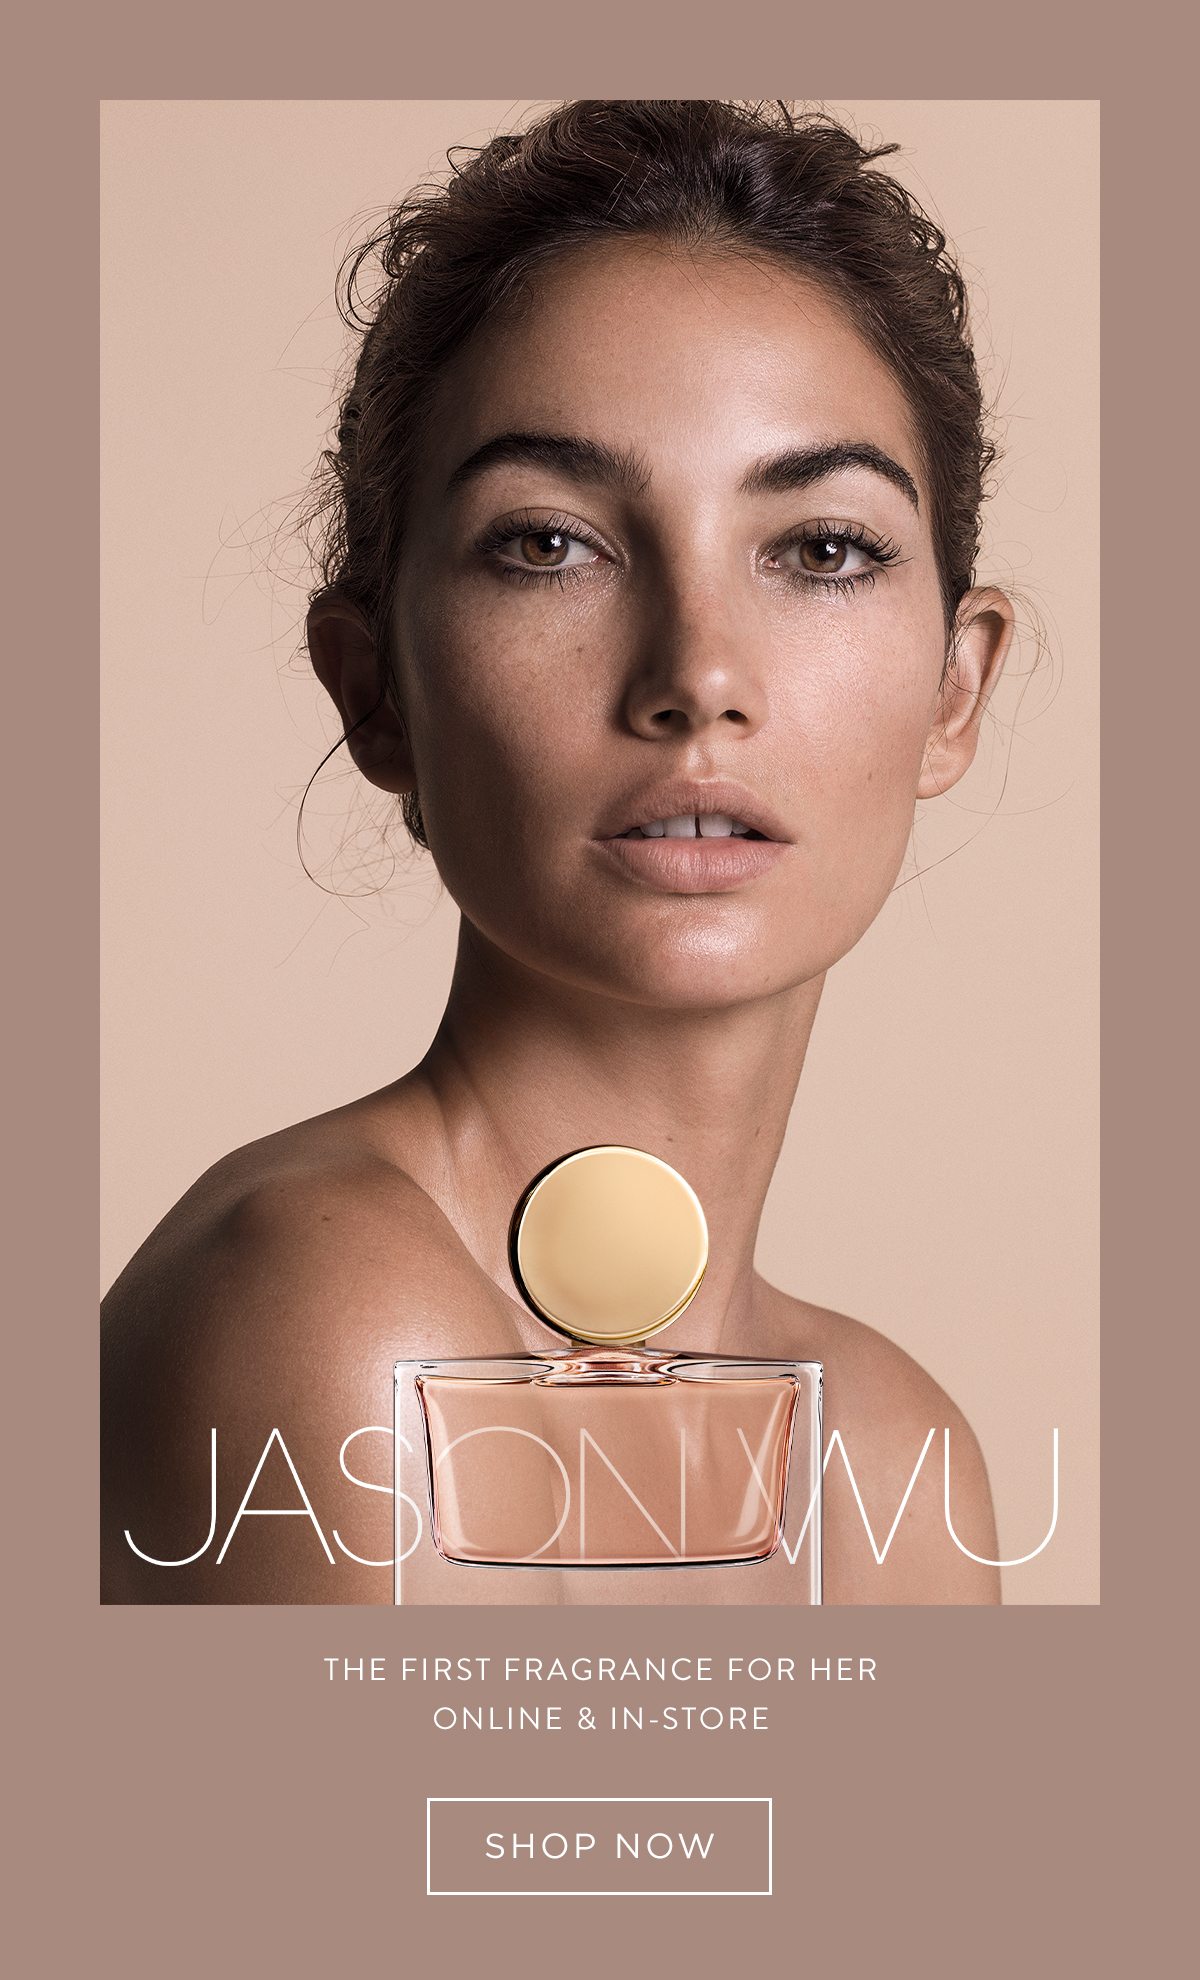 Introducing Jason Wu - The First Fragrance For Her - Shop Now